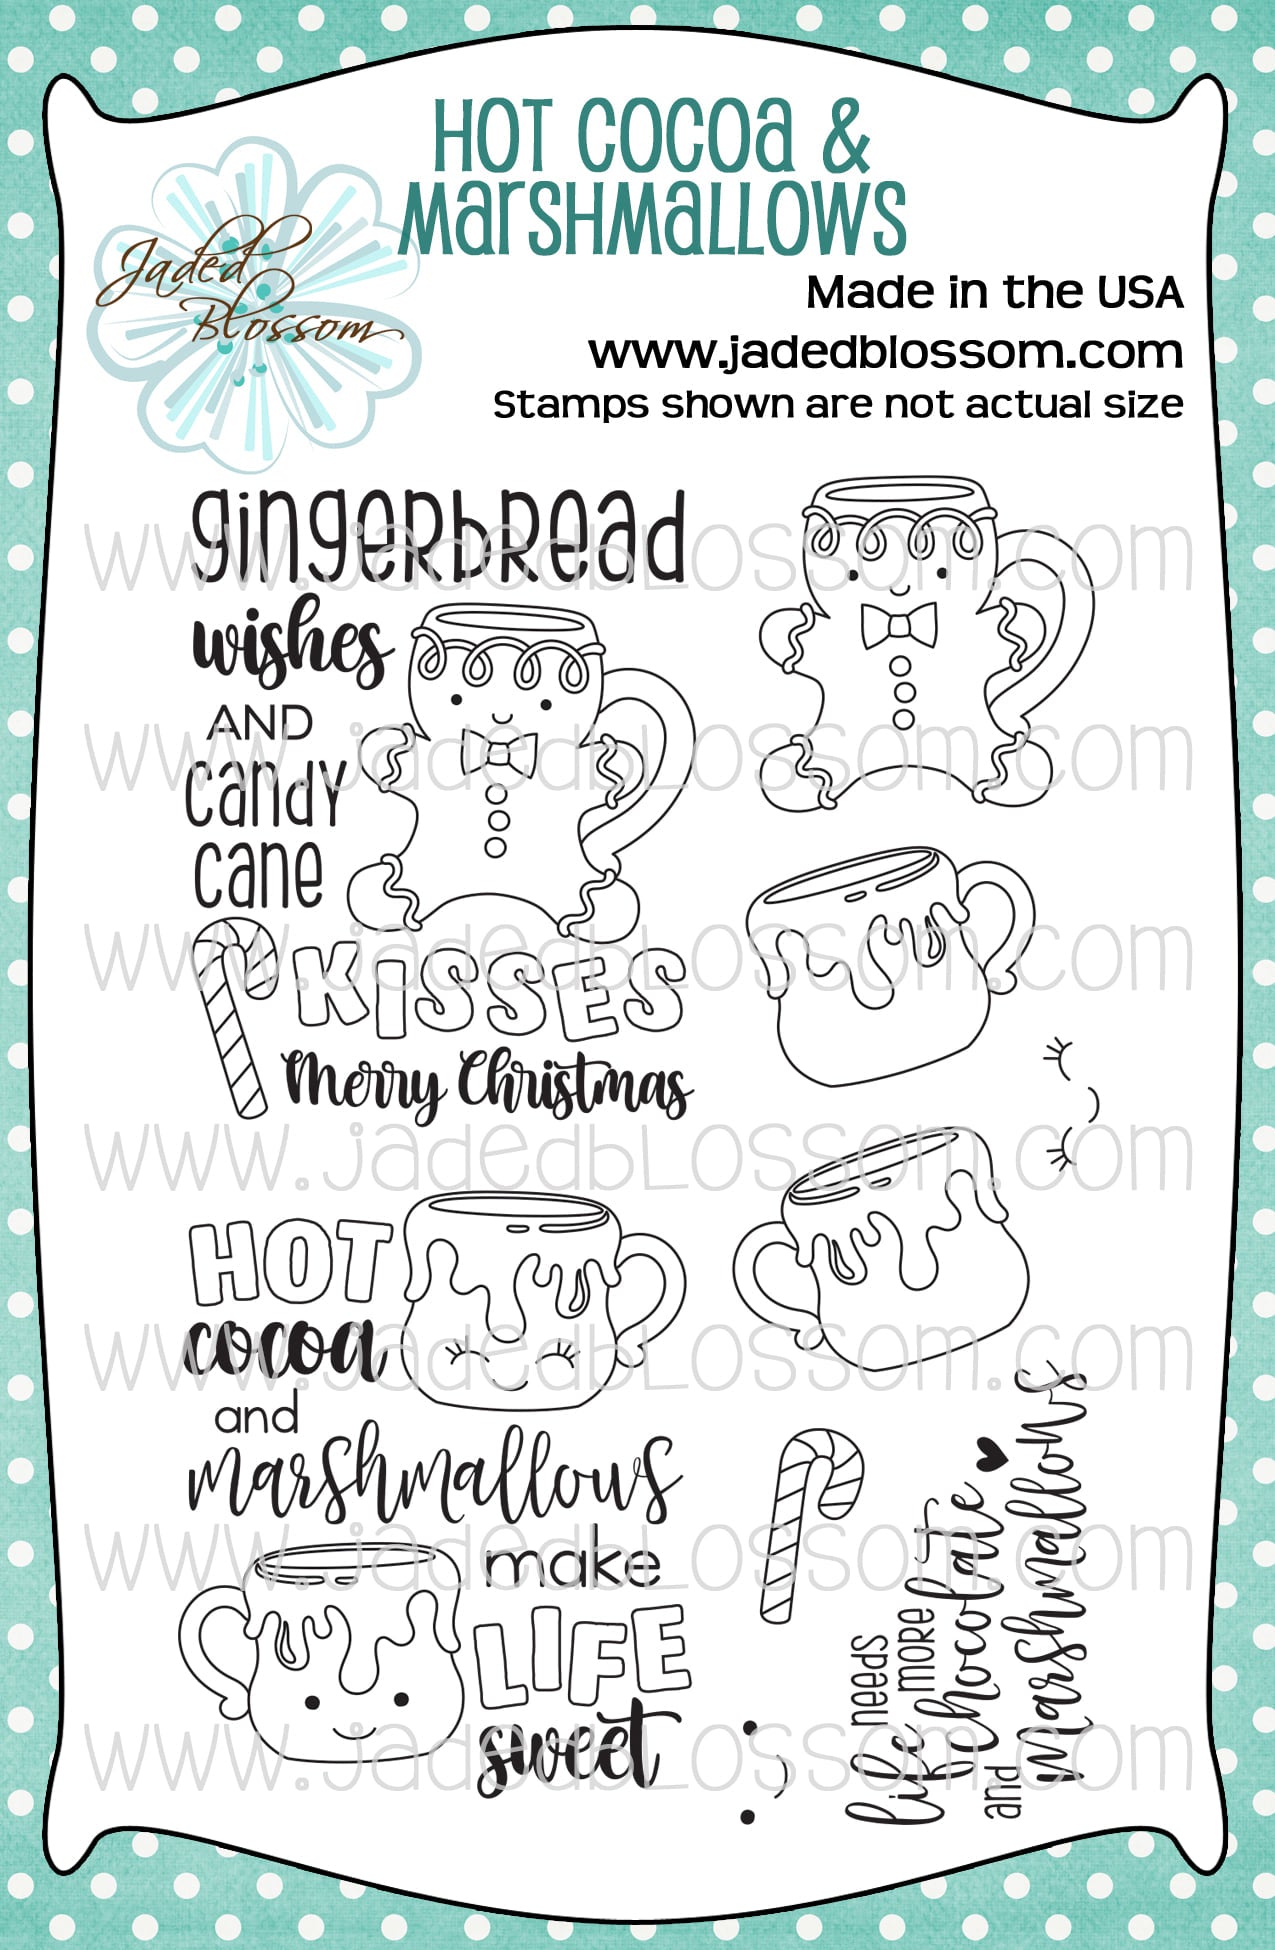 Jaded Blossoms Hot Cocoa and Marshmallows stamp set